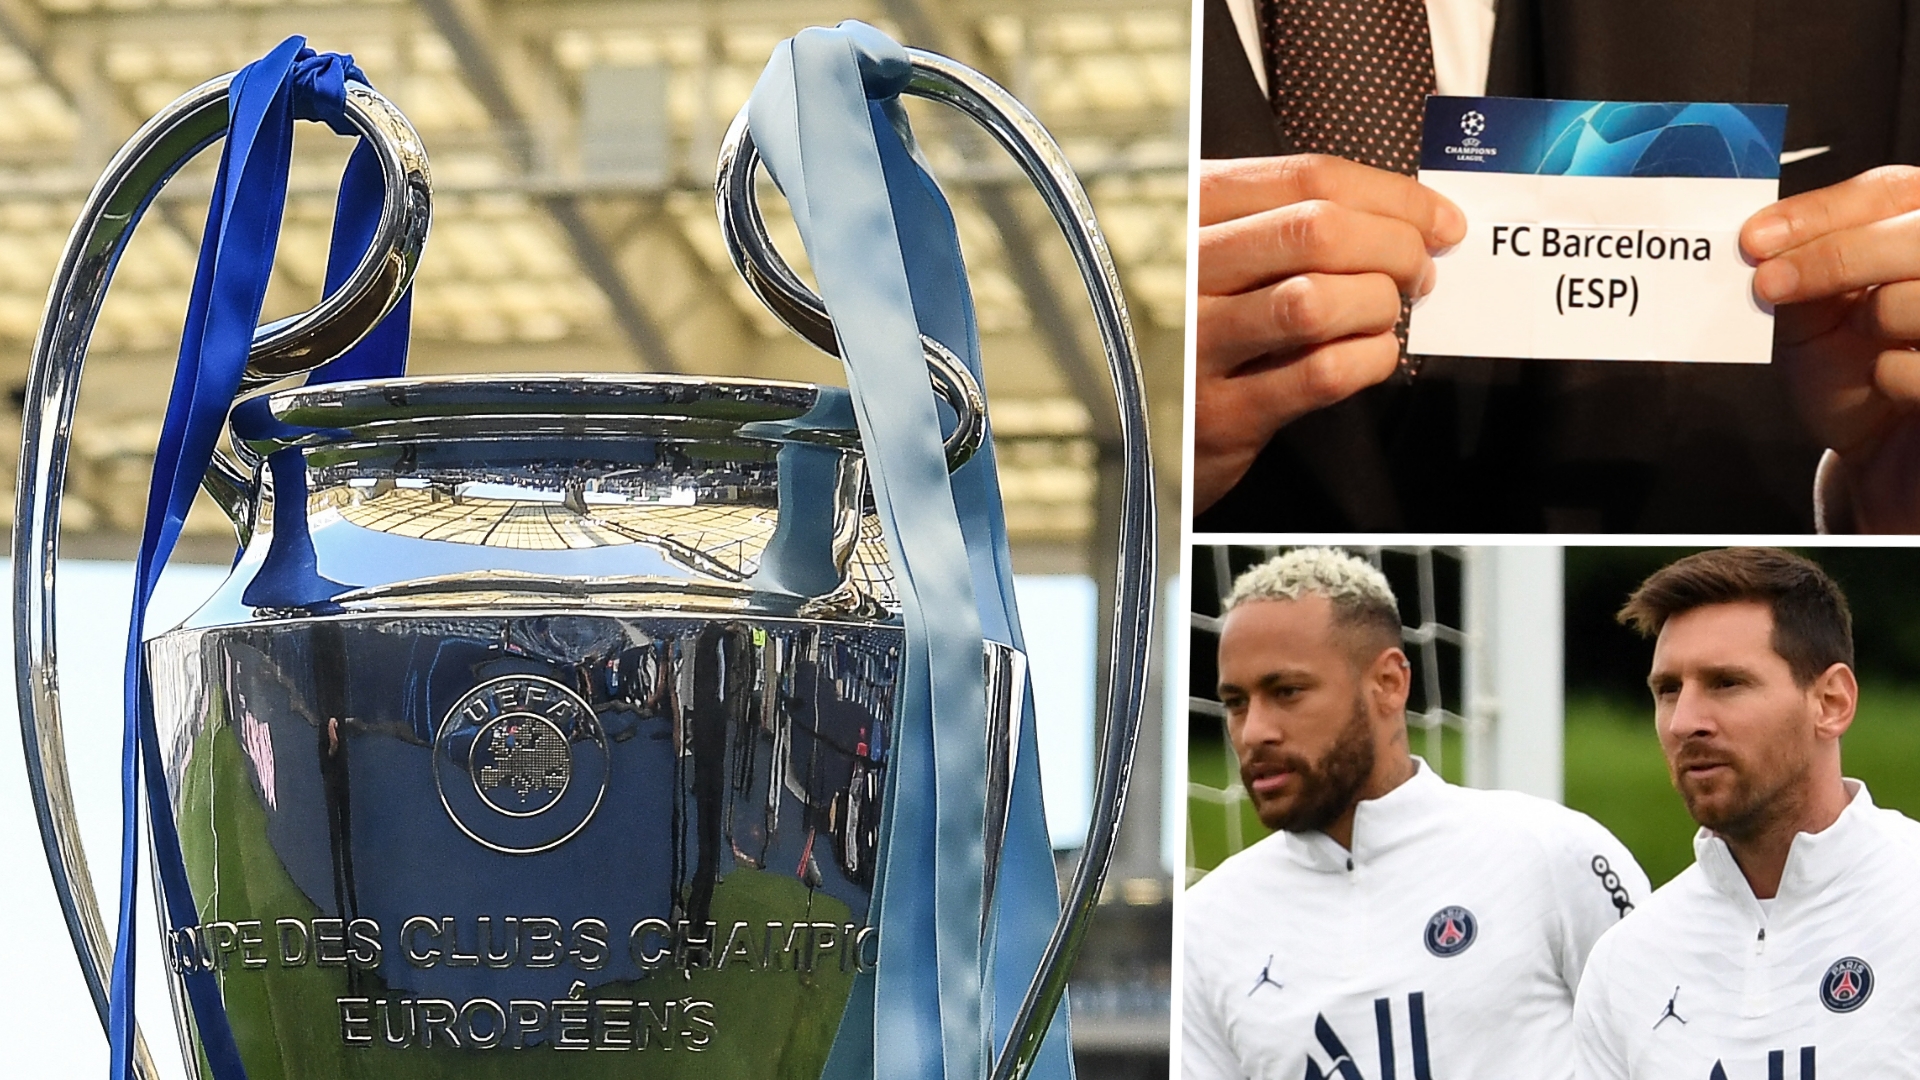 Champions League group stage draw LIVE: Man Utd, Barcelona, Real Madrid & more learn opponents